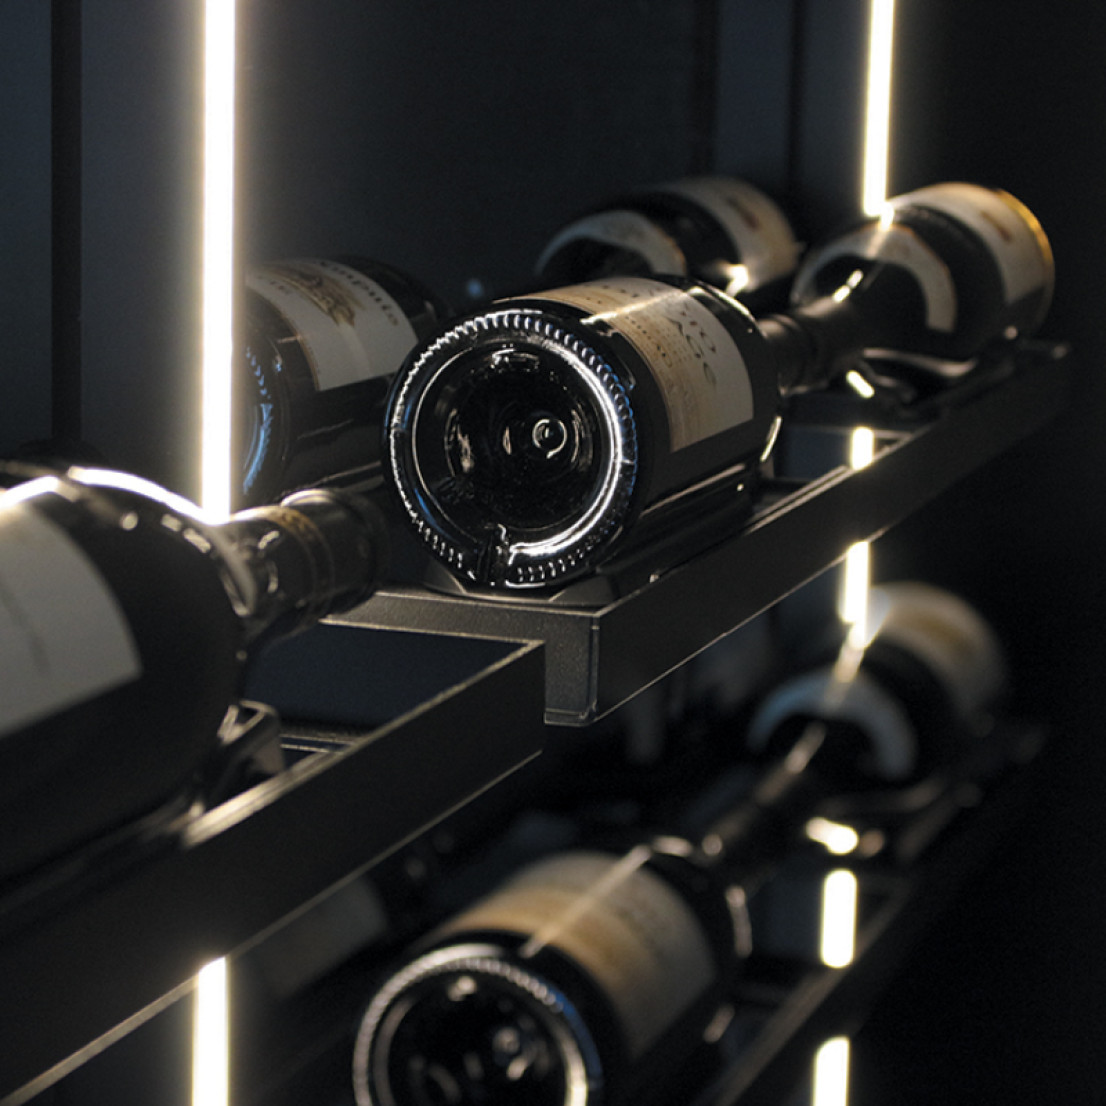 Illumination of your wine and setting with these black metal shelf columns, built-in lighting, individual bottle support, fastened to the wall or ceiling - Modulo-X